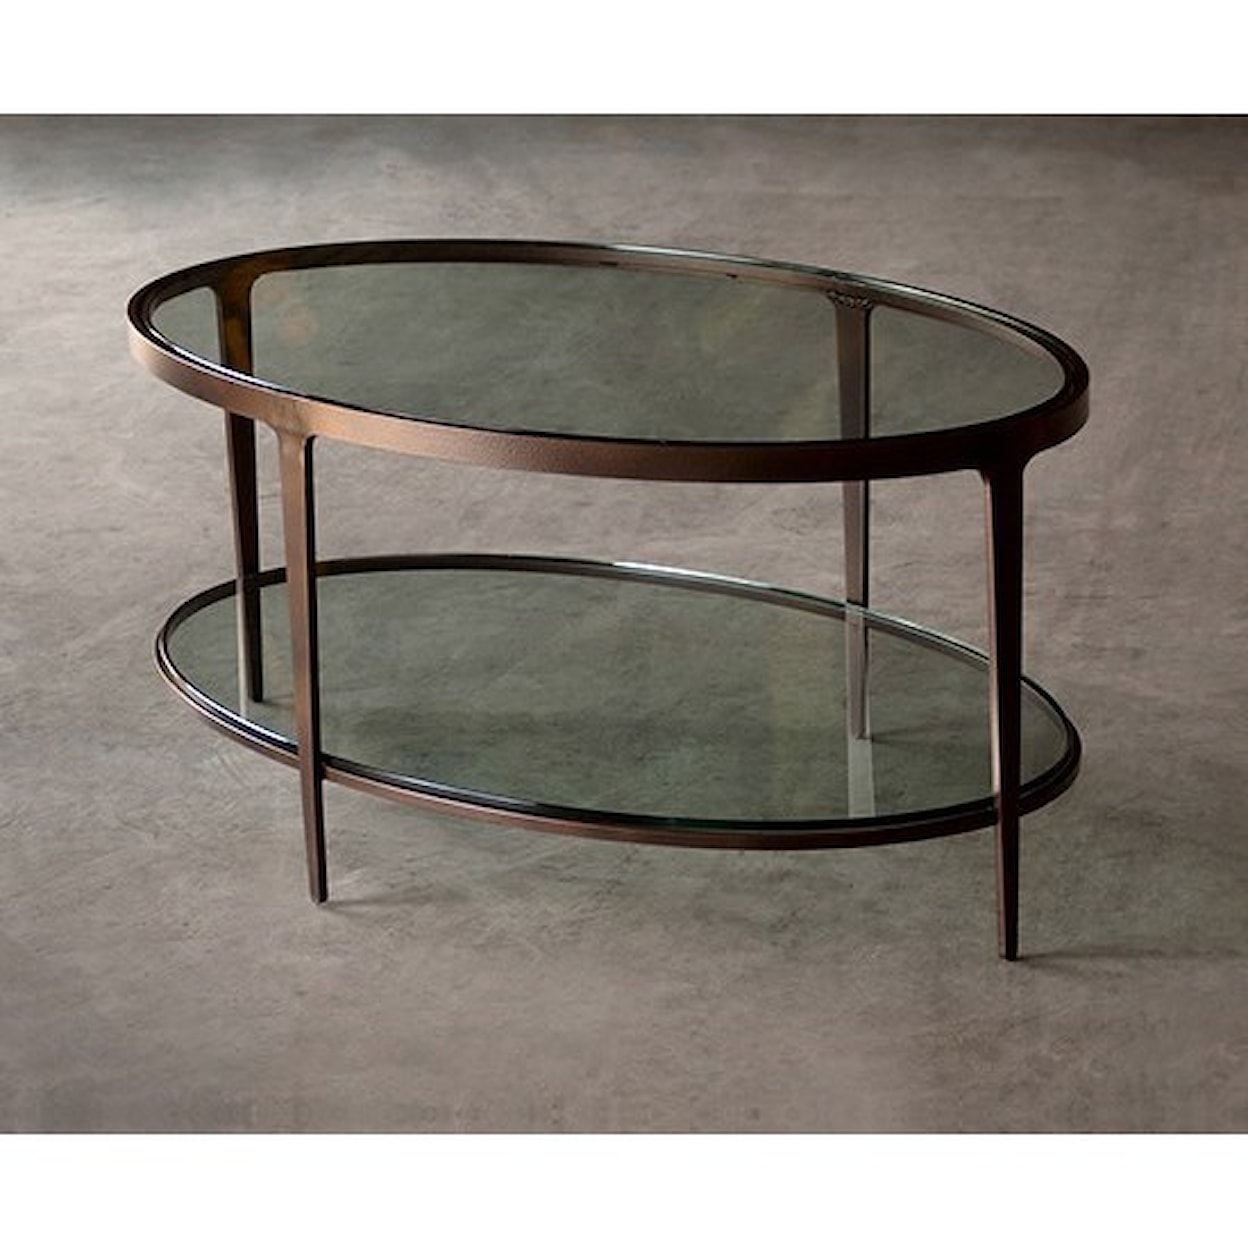 Charleston Forge Dining Room Accents Ellipse Cocktail Table